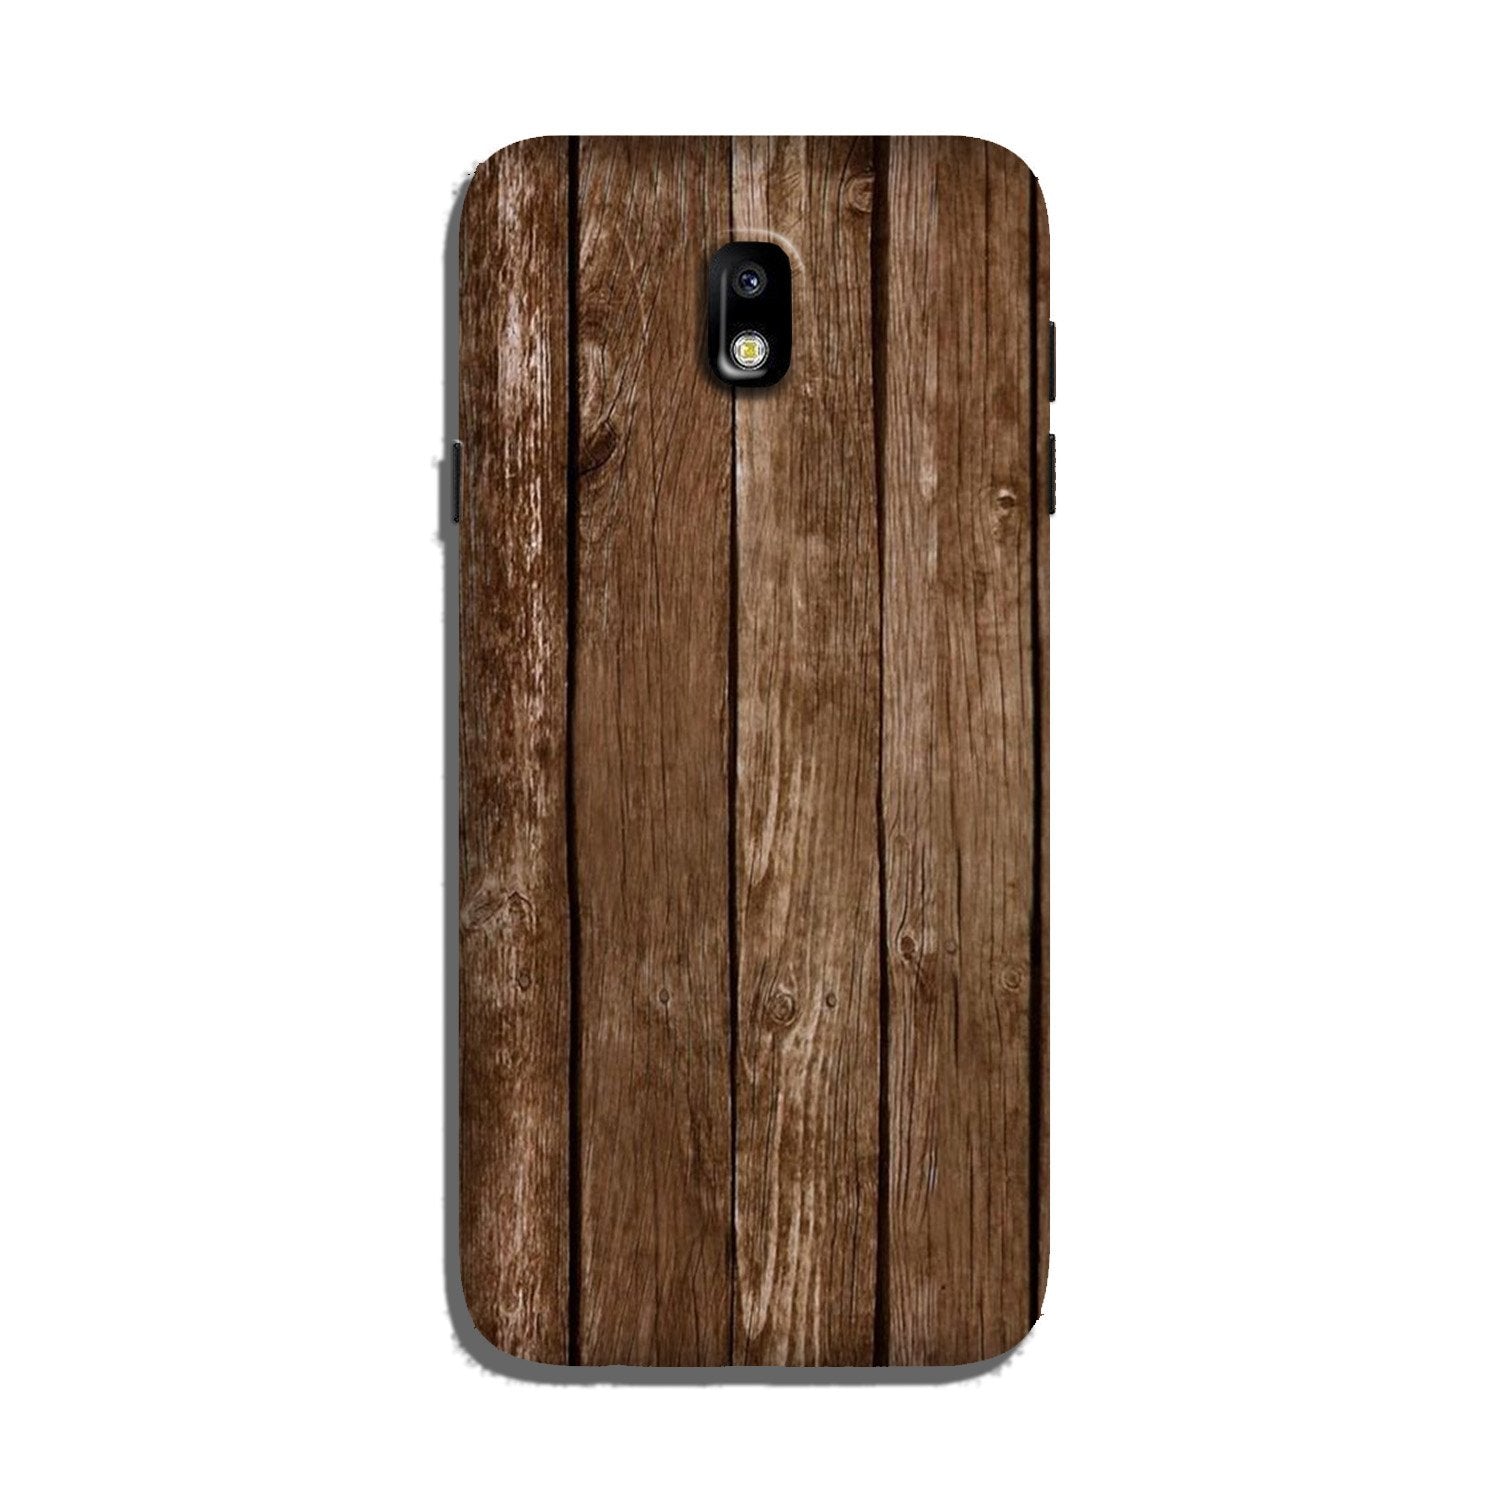 Wooden Look Case for Galaxy J7 Pro(Design - 112)